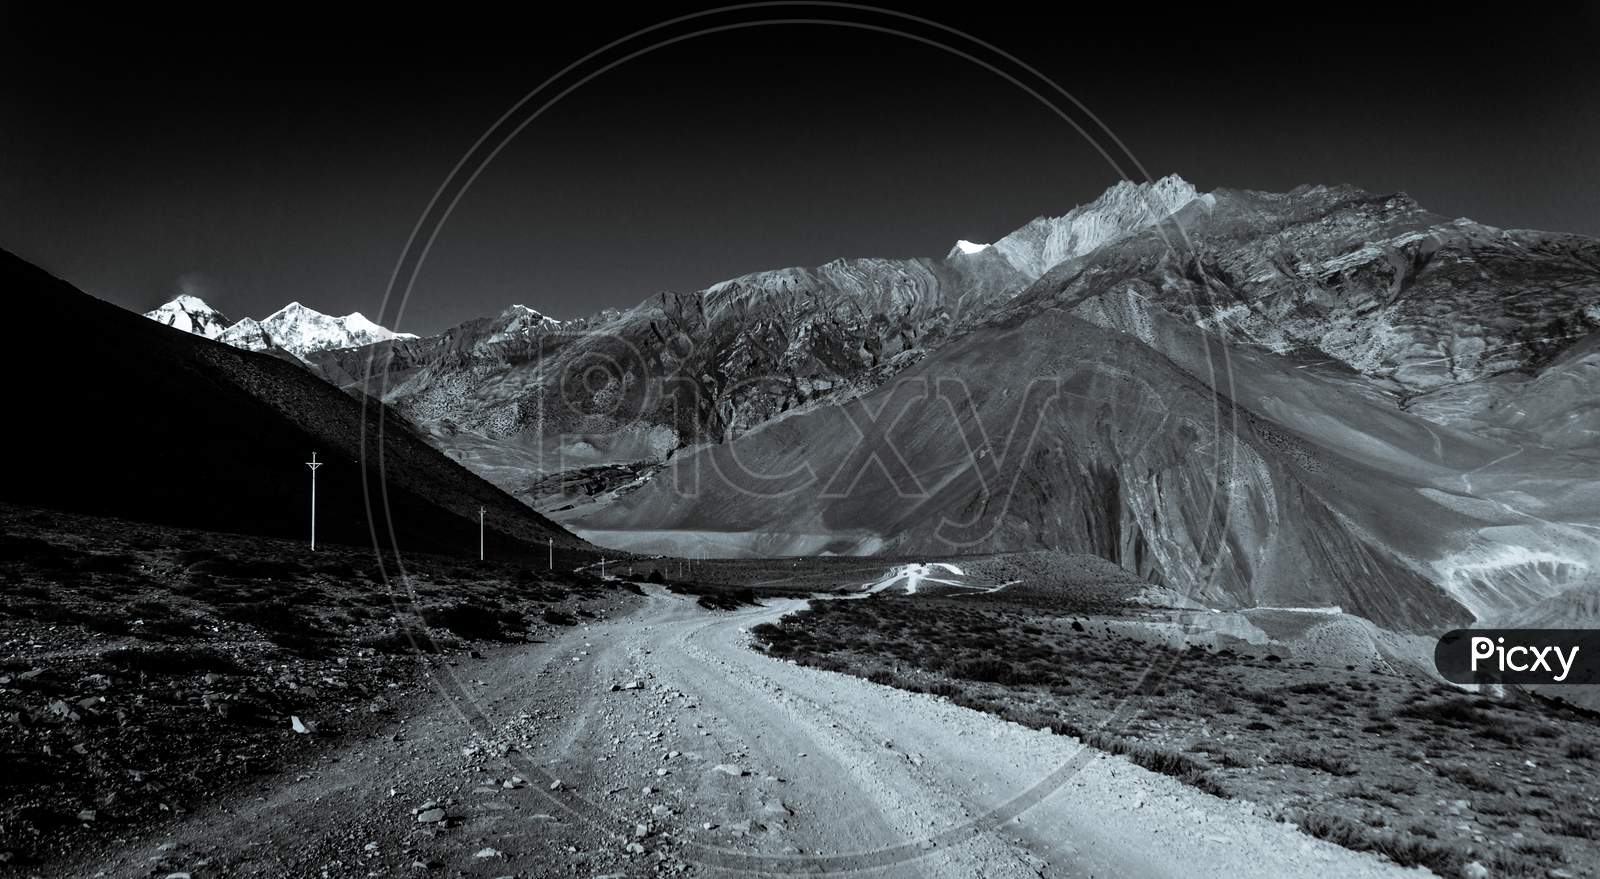 Monochromatic image of road and mountains